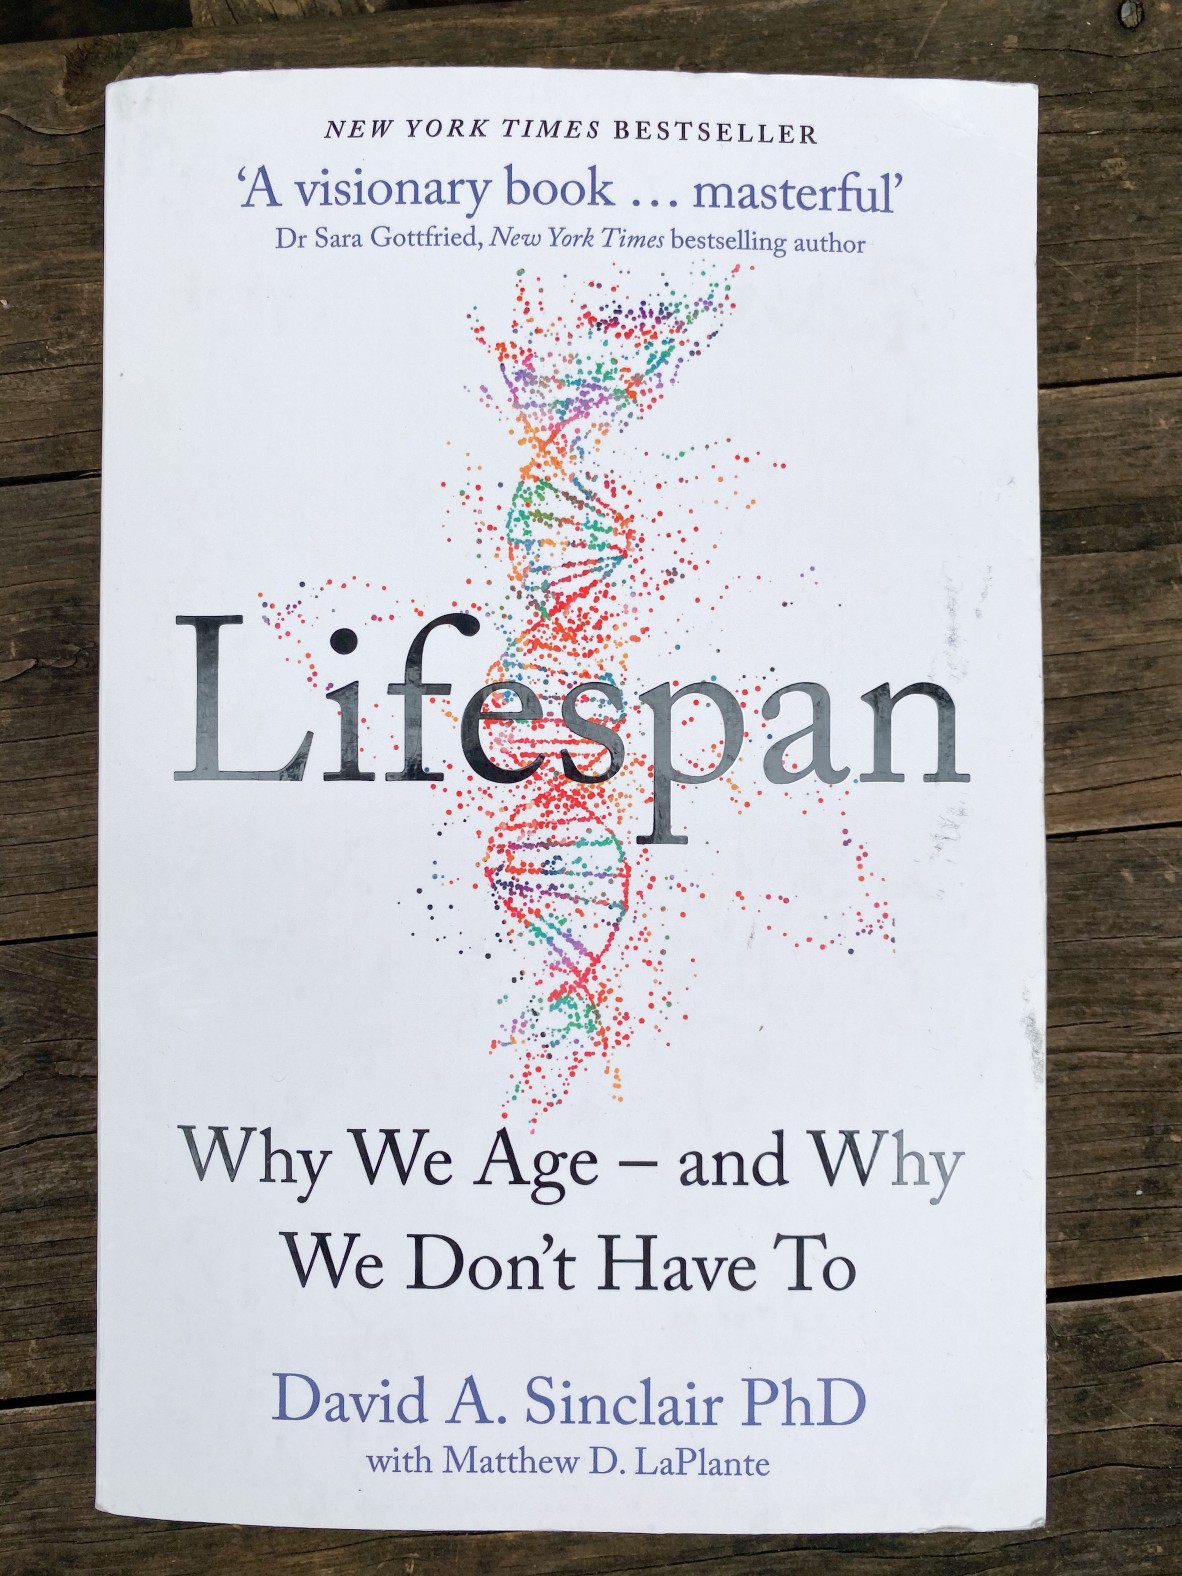 A close up of the book cover Lifespan by David A Sinclair which is white with a rainbow double helix in the centre